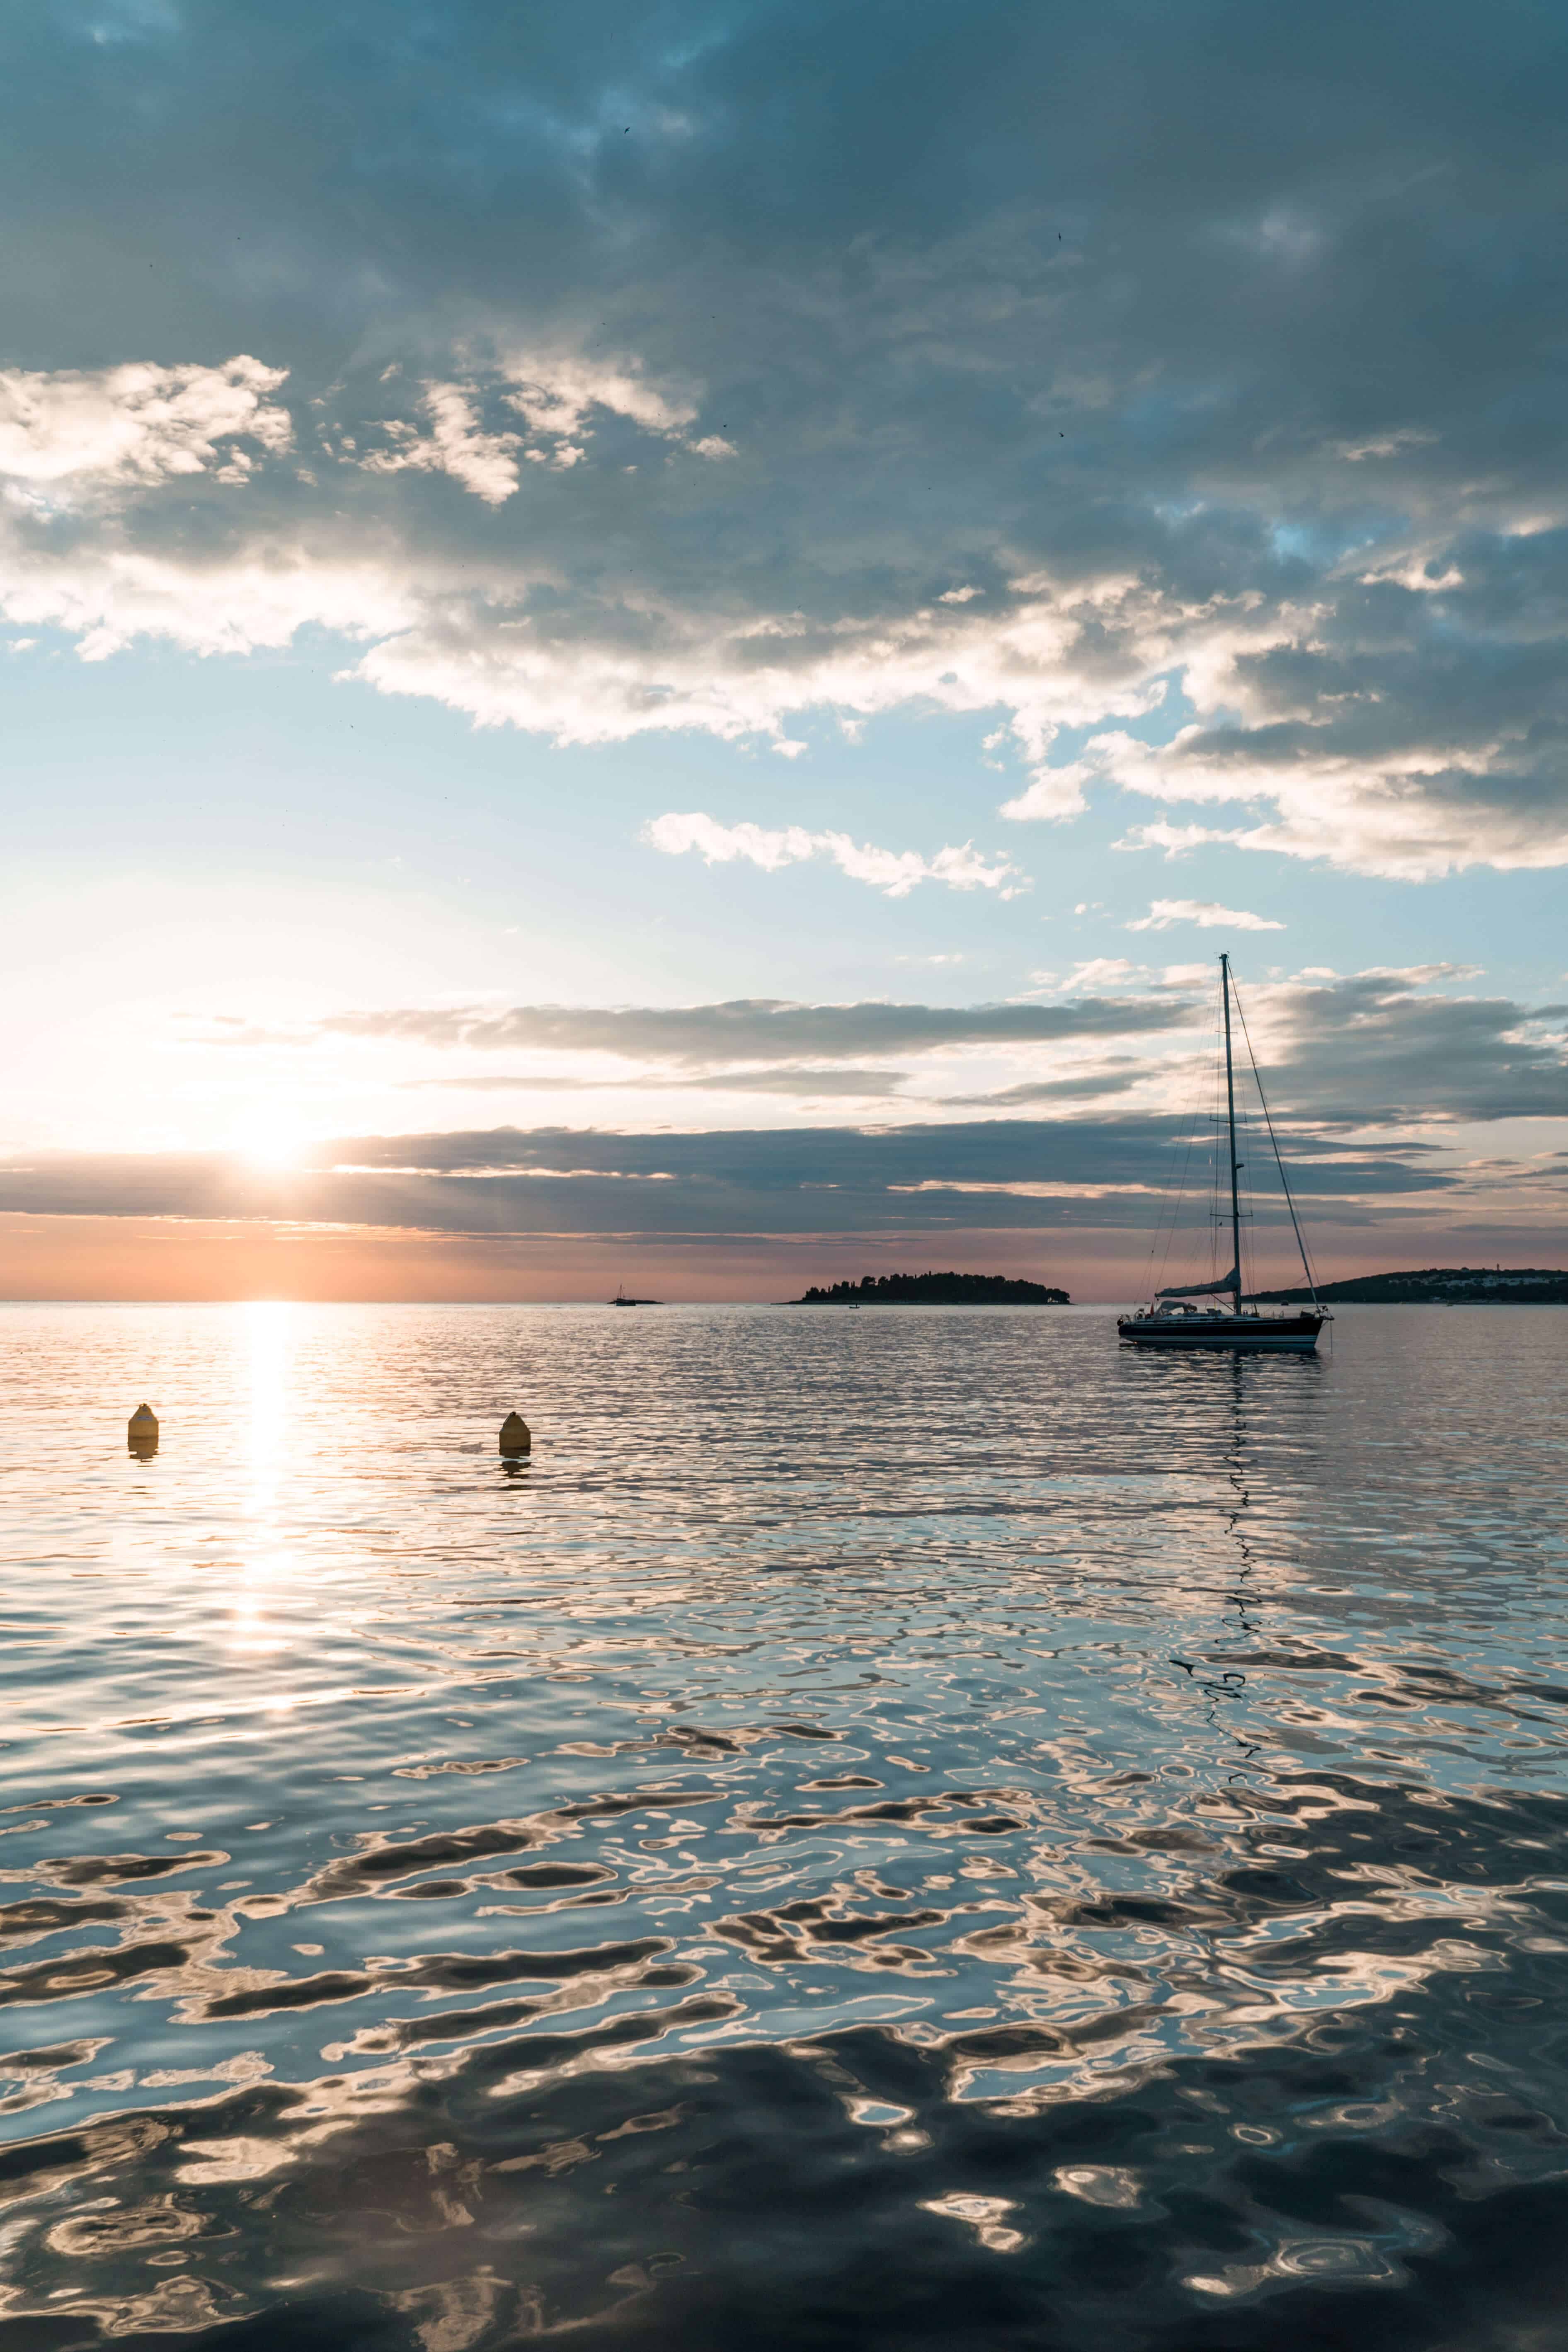 How to Spend 2 Days in Istria, Croatia | Sea views from Rovinj | The Republic of Rose | 48 Hours Exploring Pula and Rovinj | #Pula #Rovinj #Istria #Croatia